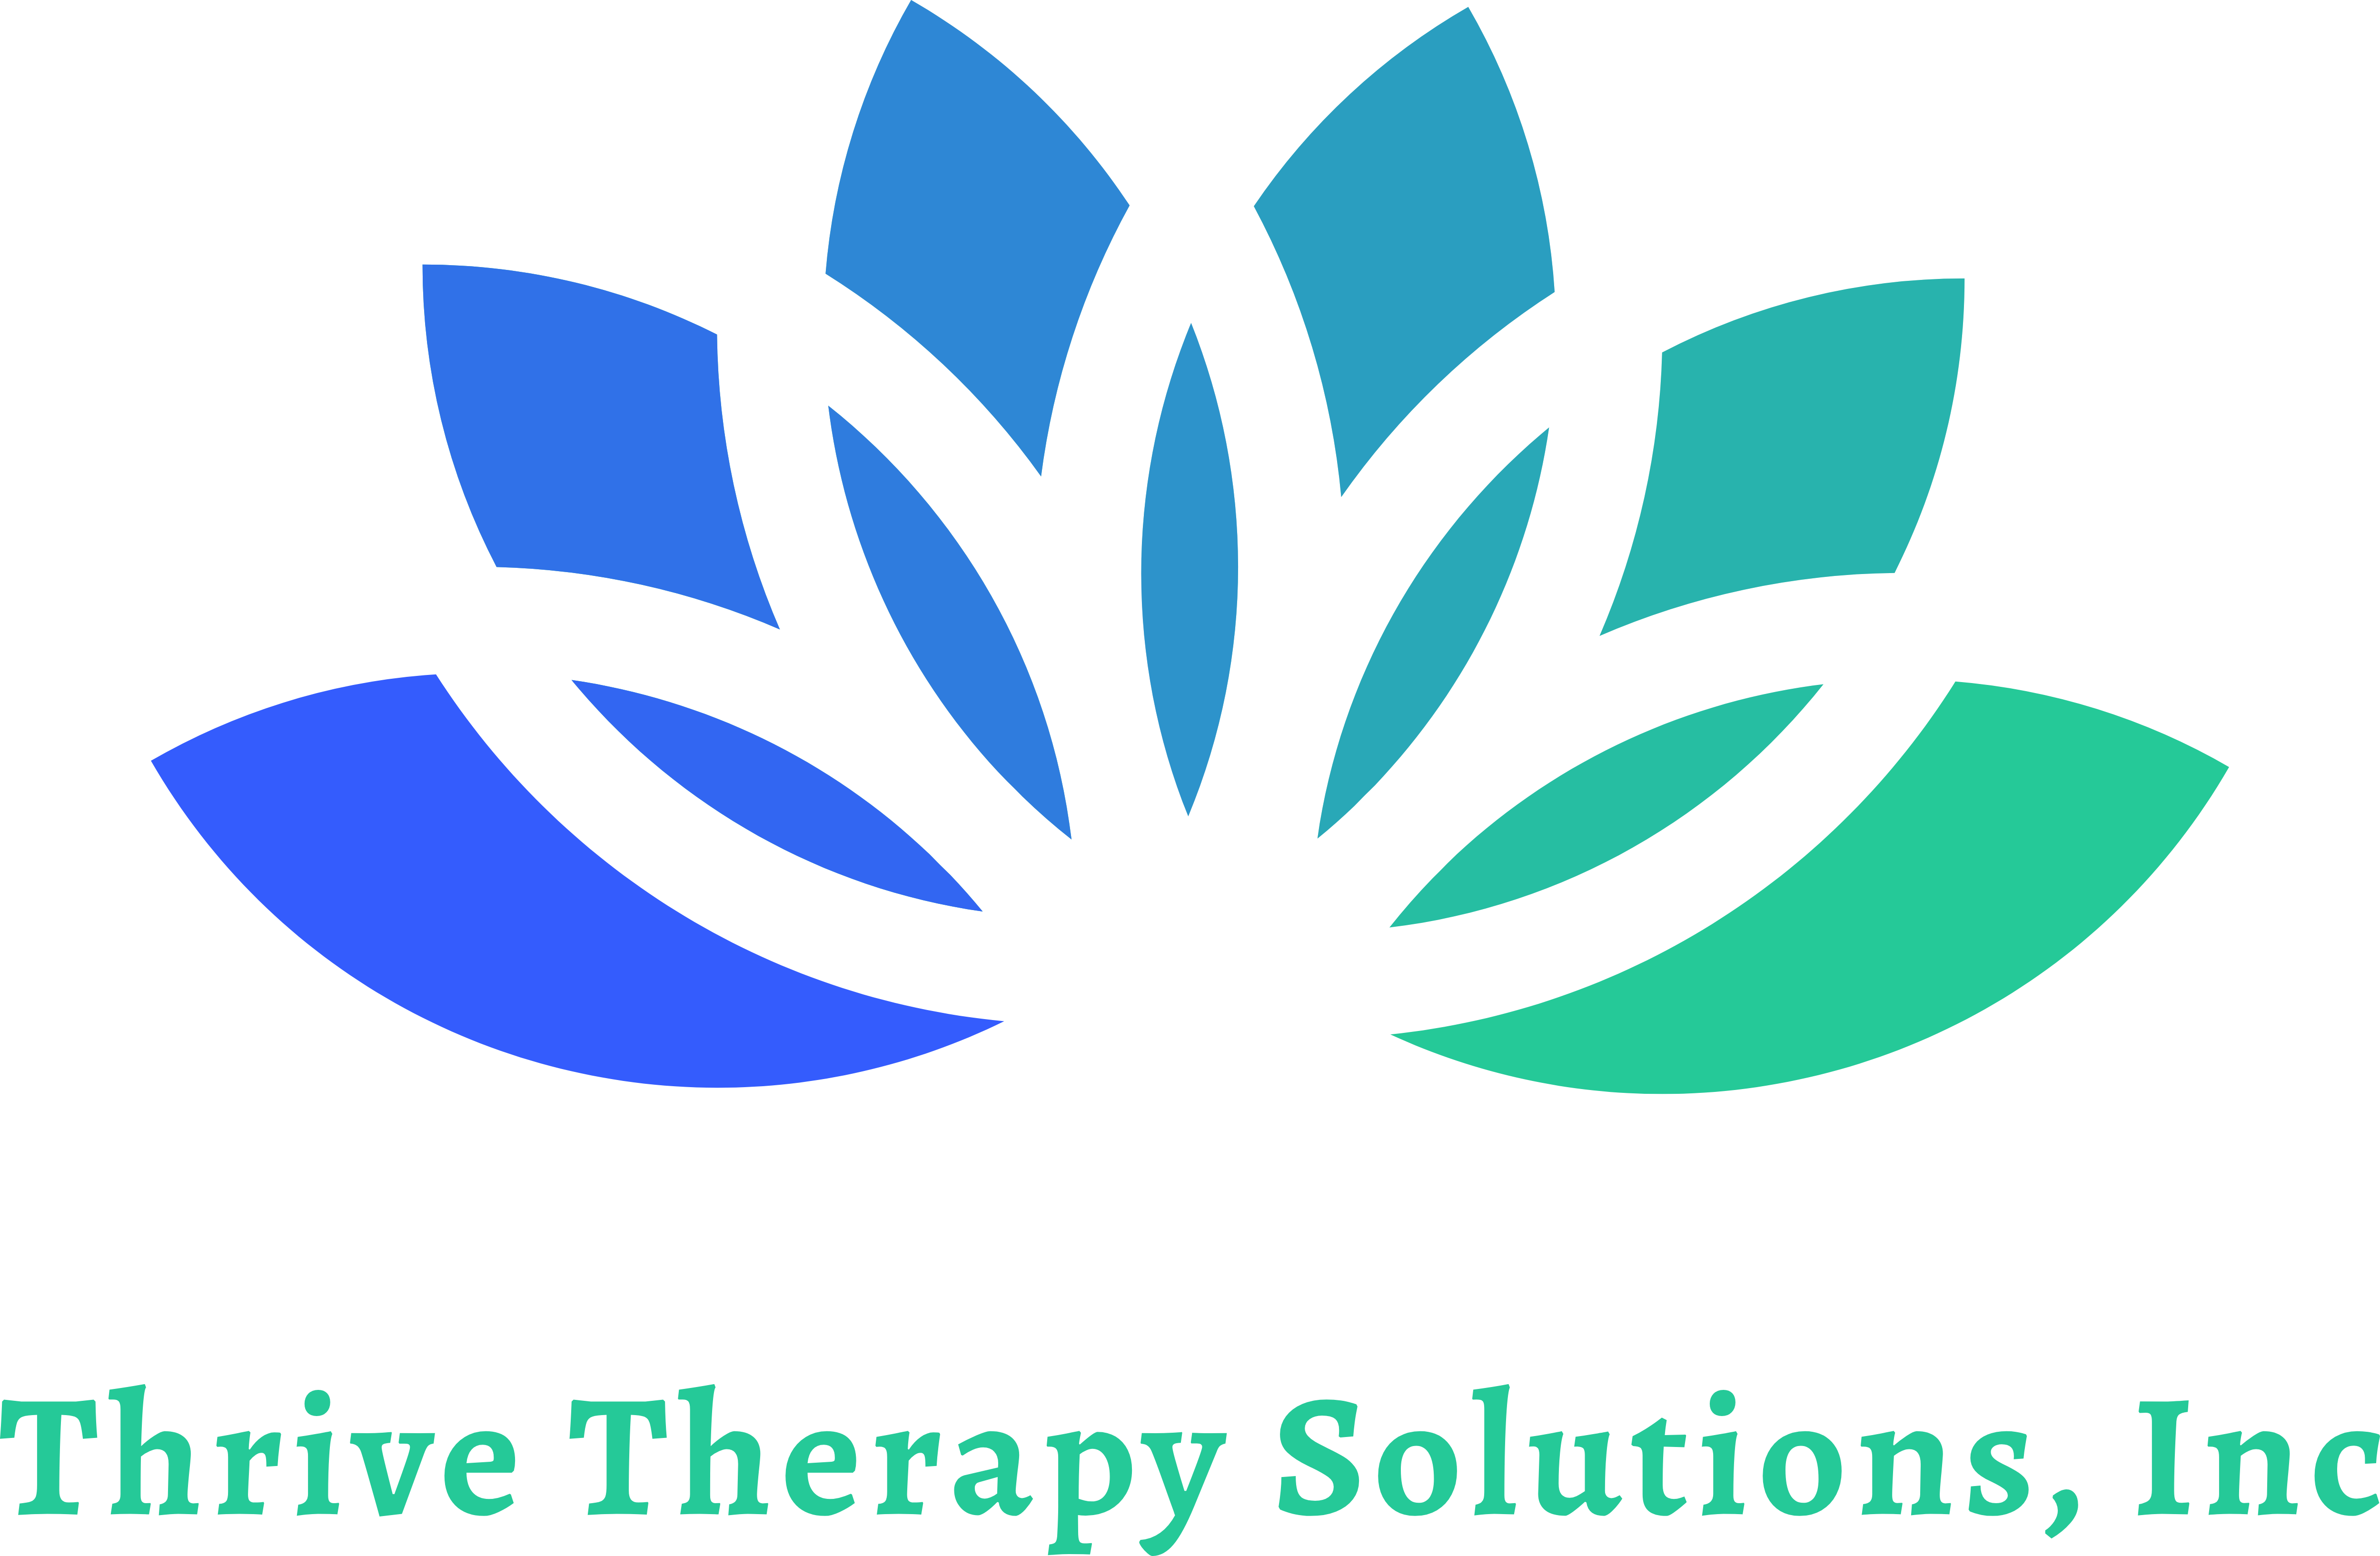 M38865 - Thrive Therapy Solutions, Inc